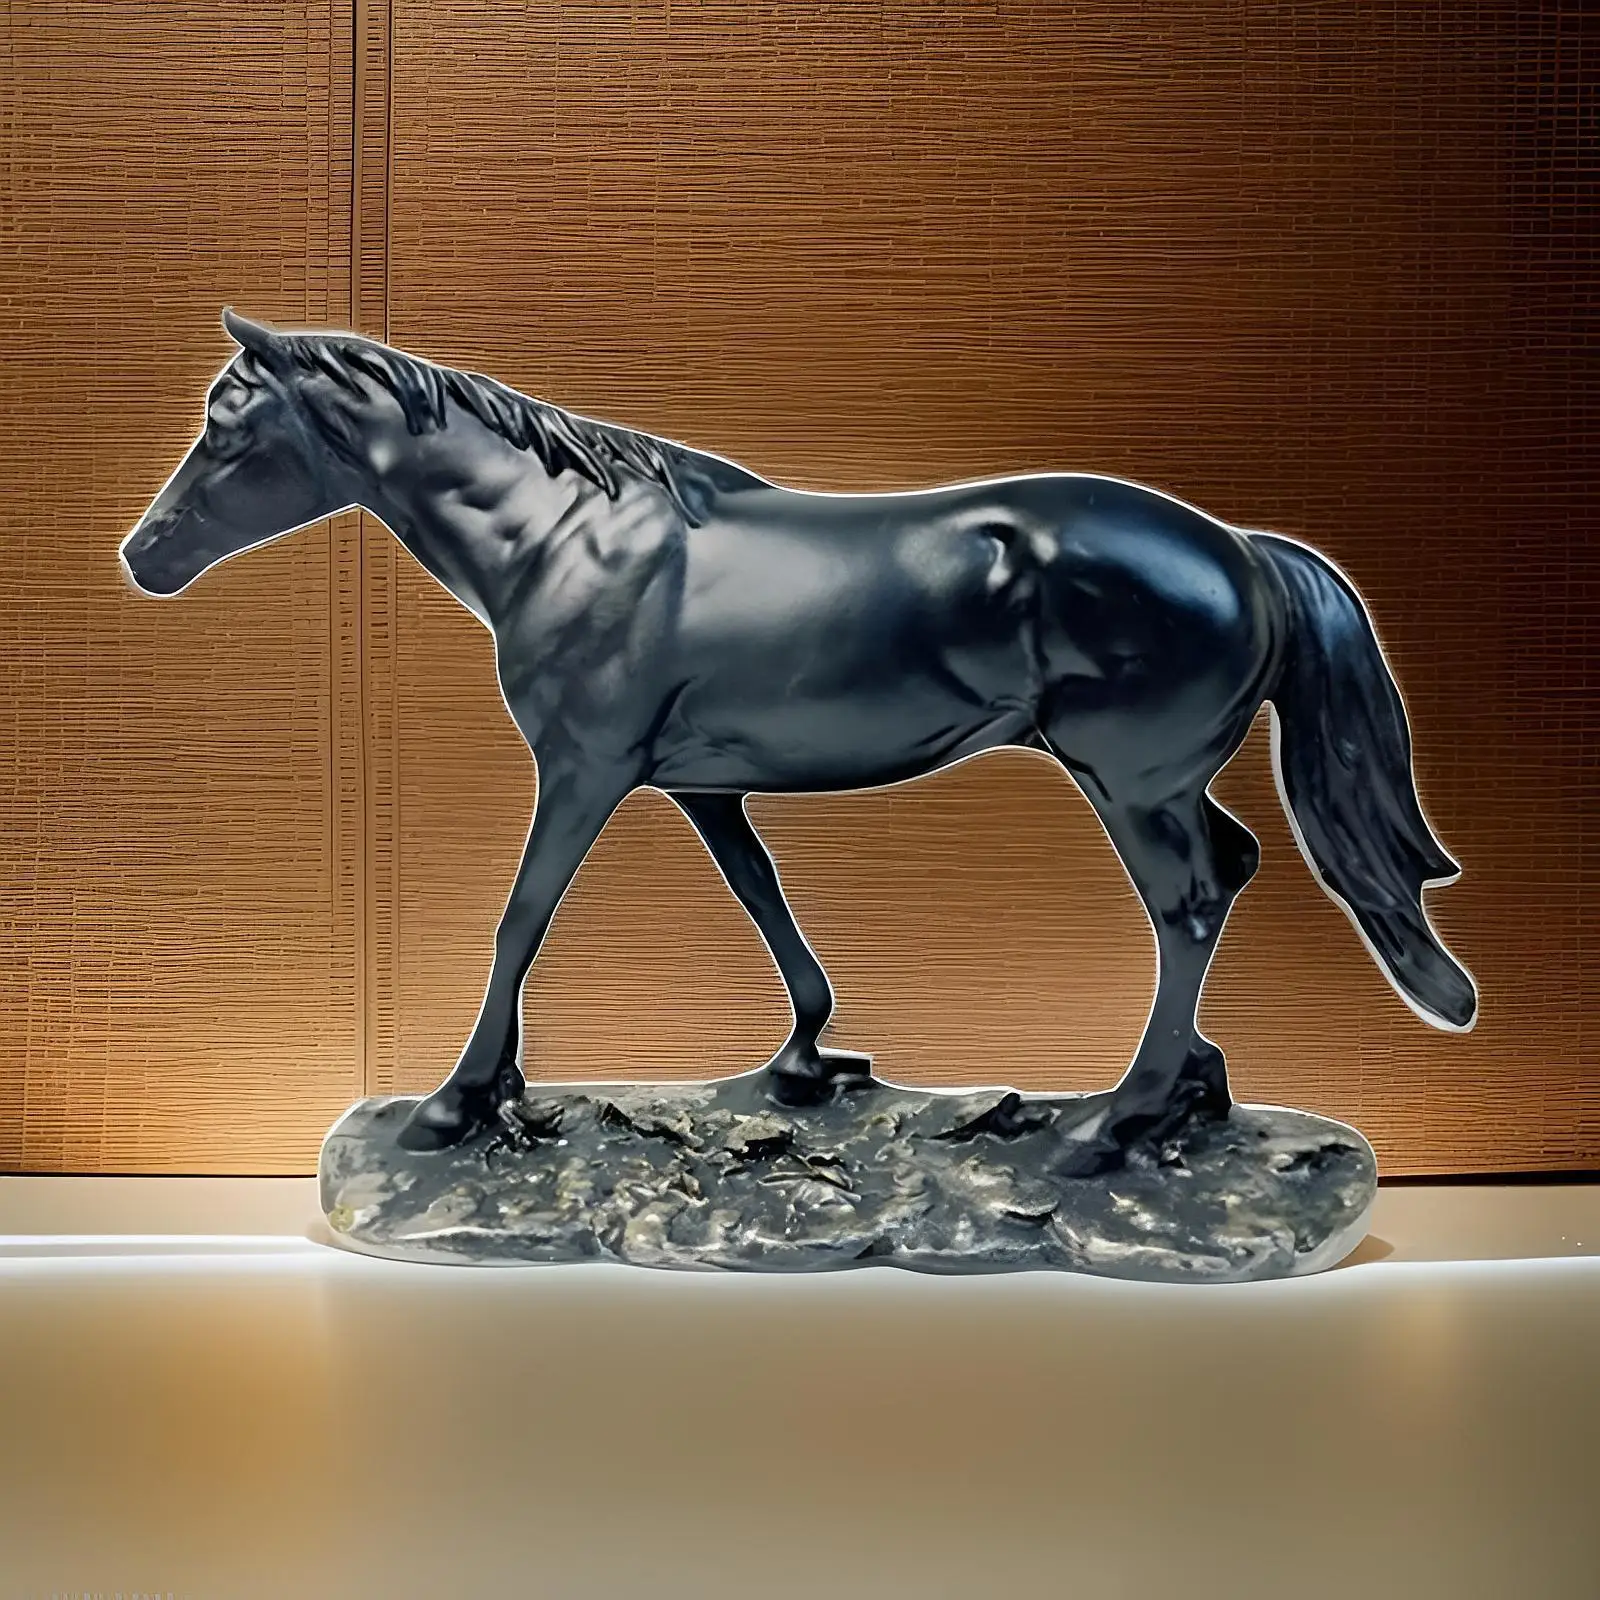 Horse Figurines Decor Home Decorations Tabletop Ornaments Horse Statue Decoration for Hotel Holiday Office Store Housewarming